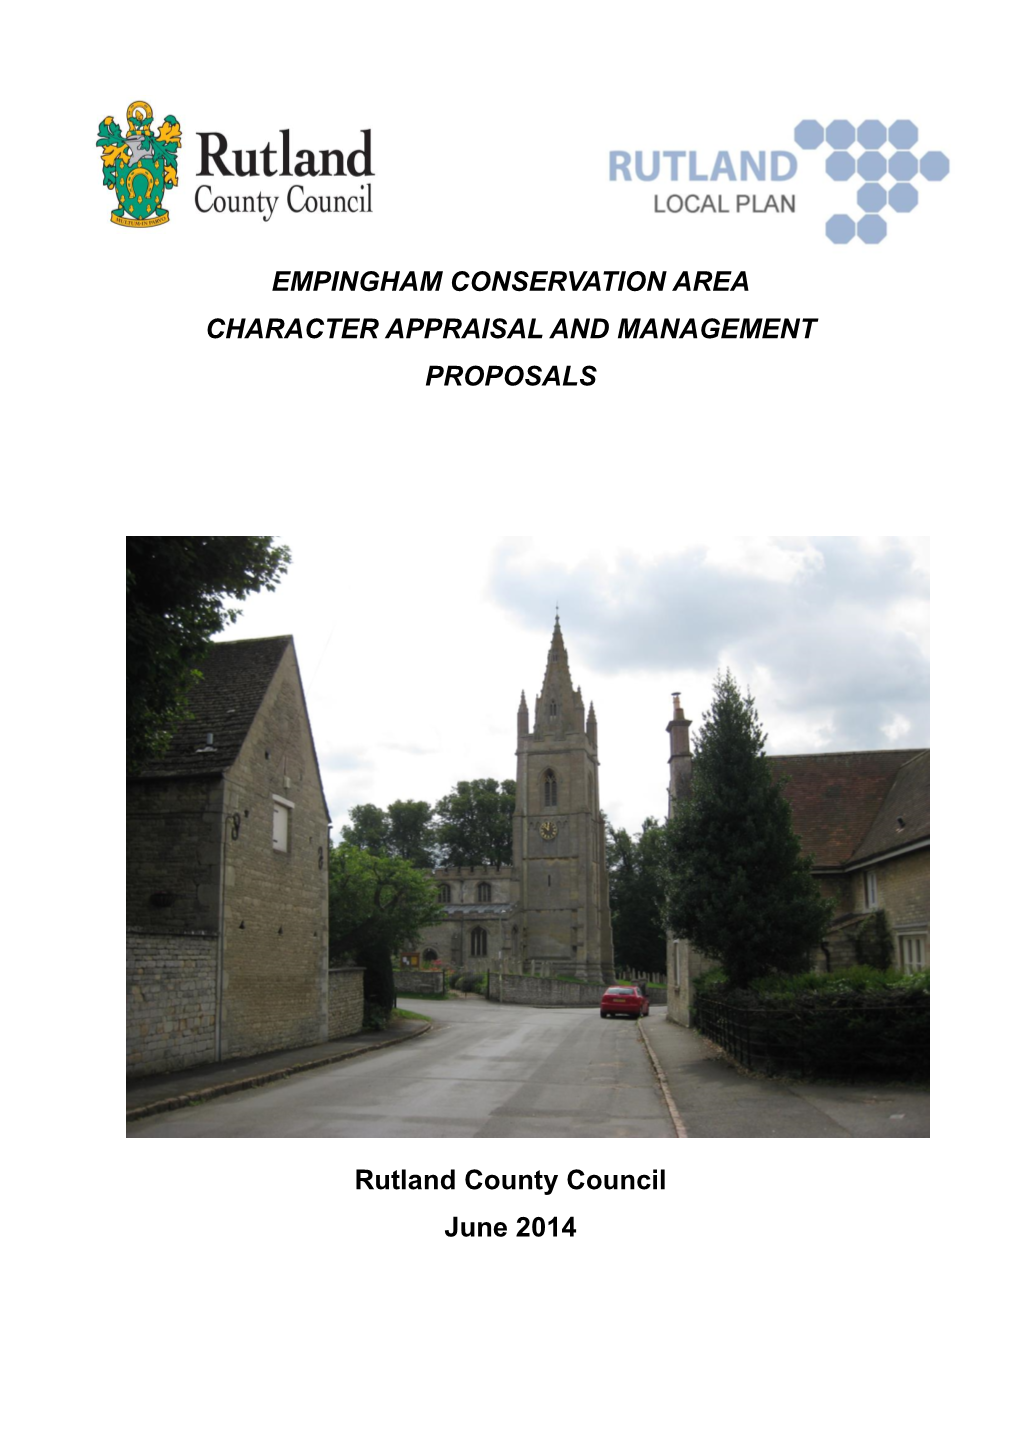 Empingham Conservation Area Character Appraisal and Management Proposals